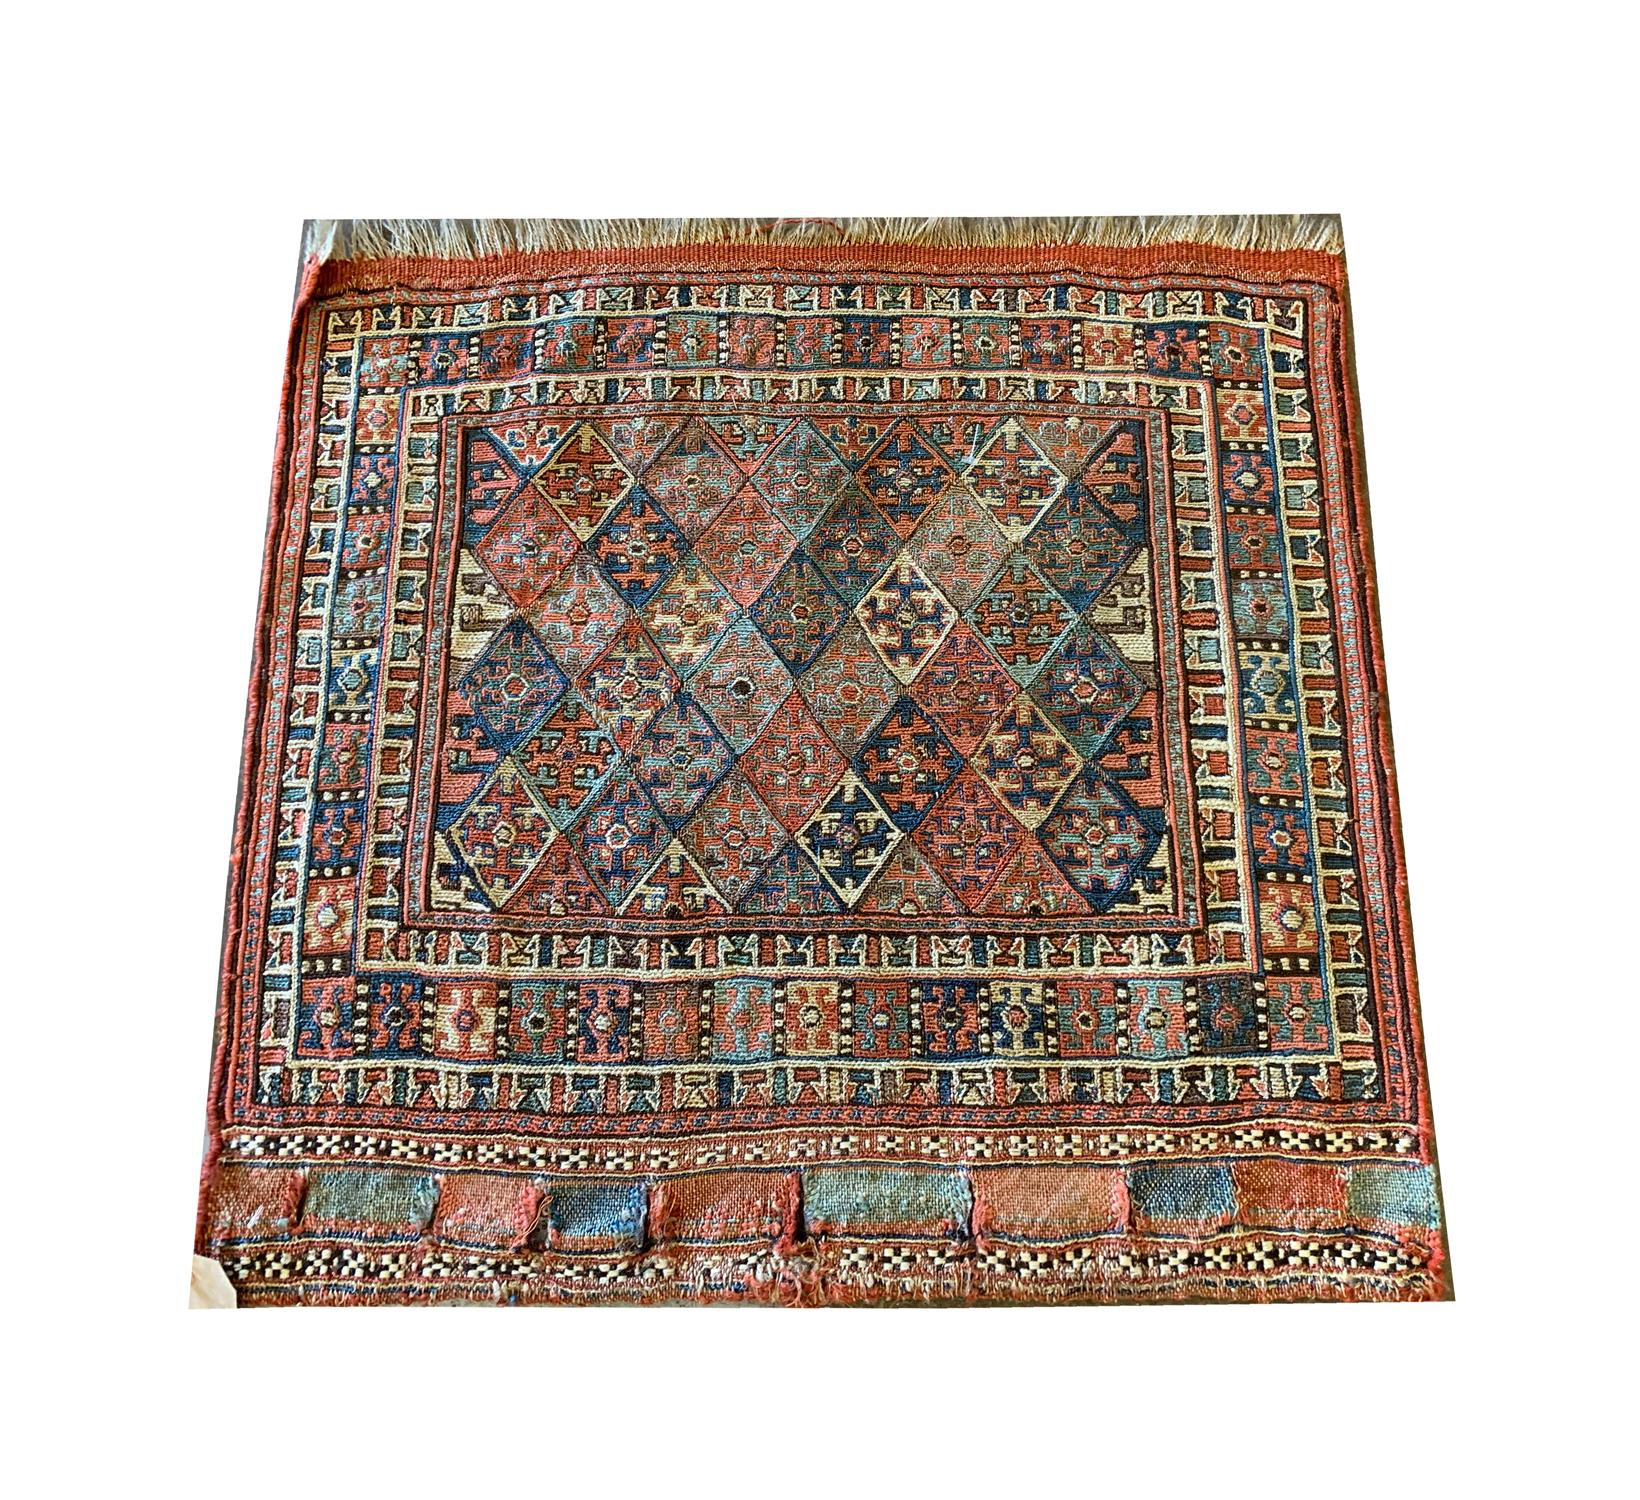 This elegant handmade Kilim was woven in Caucasia in the 1880s and features a fantastic geometric design. Intricately woven with accents of rust, blue, red, beige and cream that make up the repeat hook motif pattern and the layered border. This